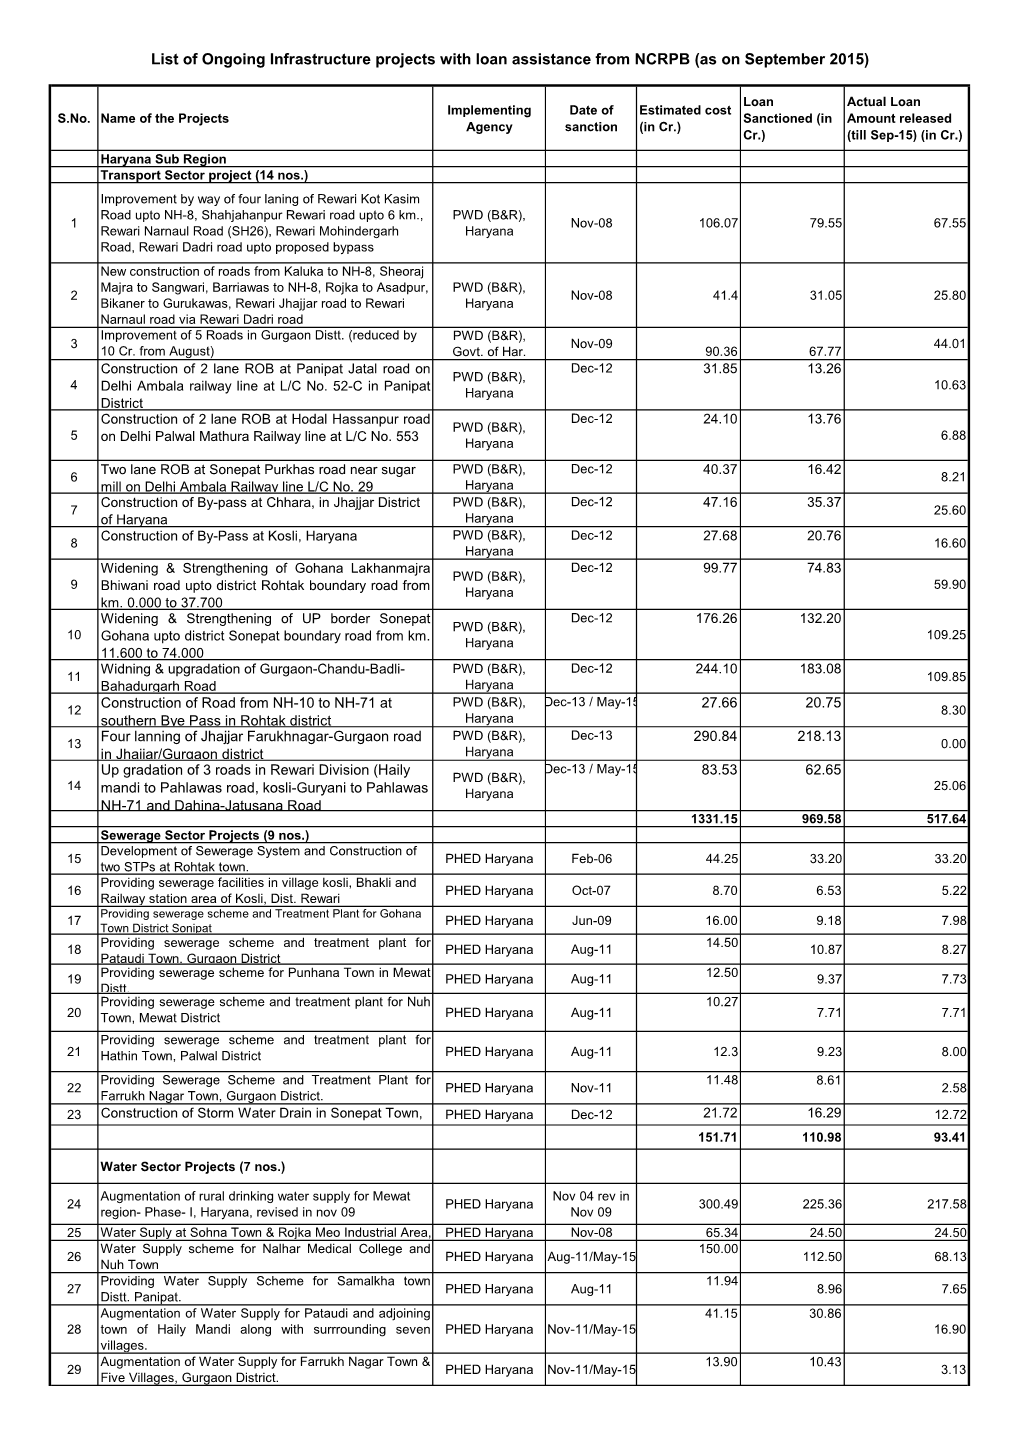 List of Ongoing Infrastructure Projects with Loan Assistance from NCRPB (As on September 2015)